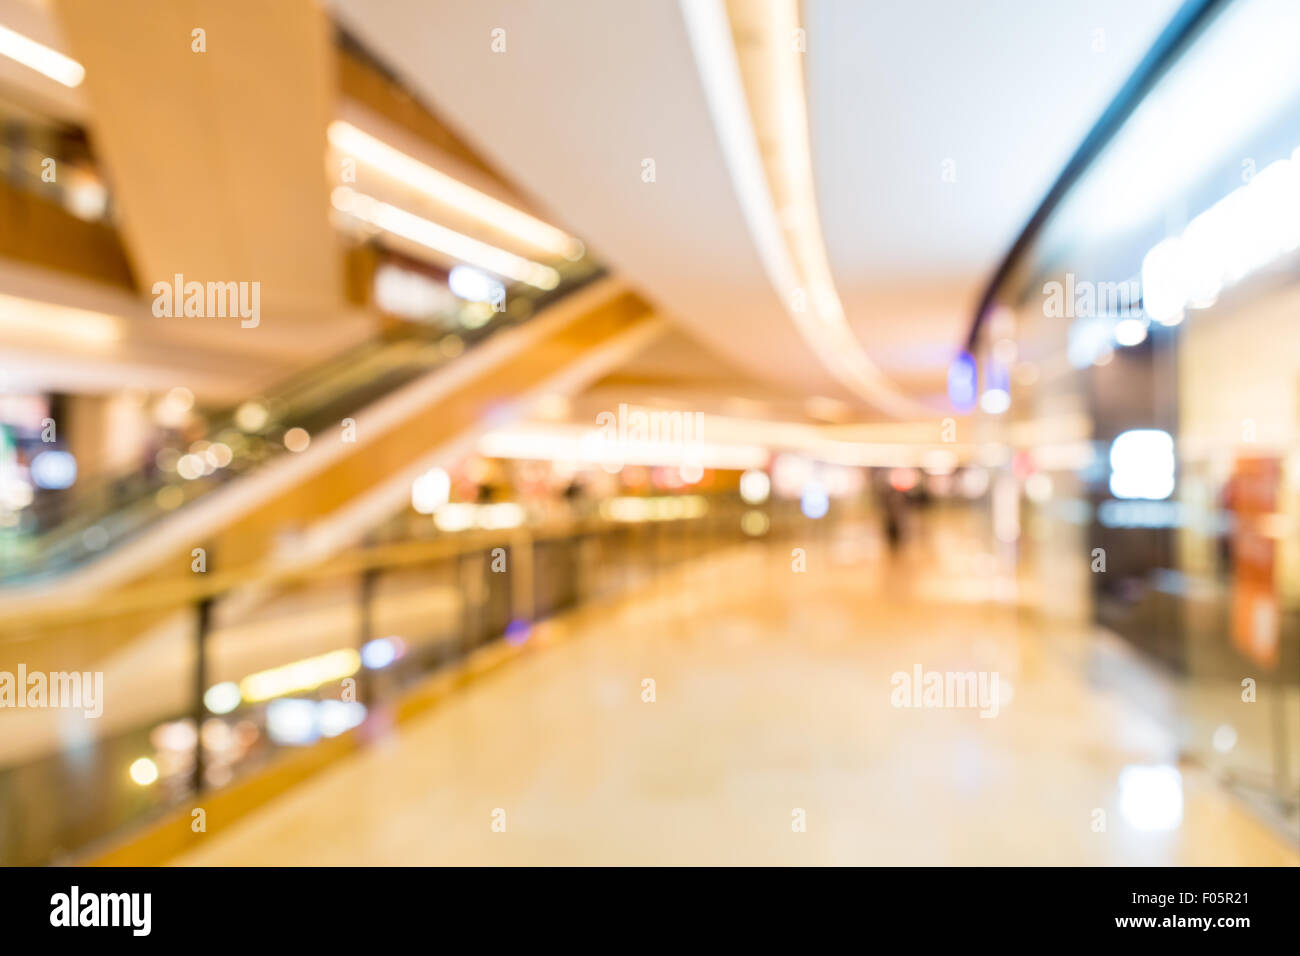 Background of shopping mall Stock Photo by kawing921 88792200